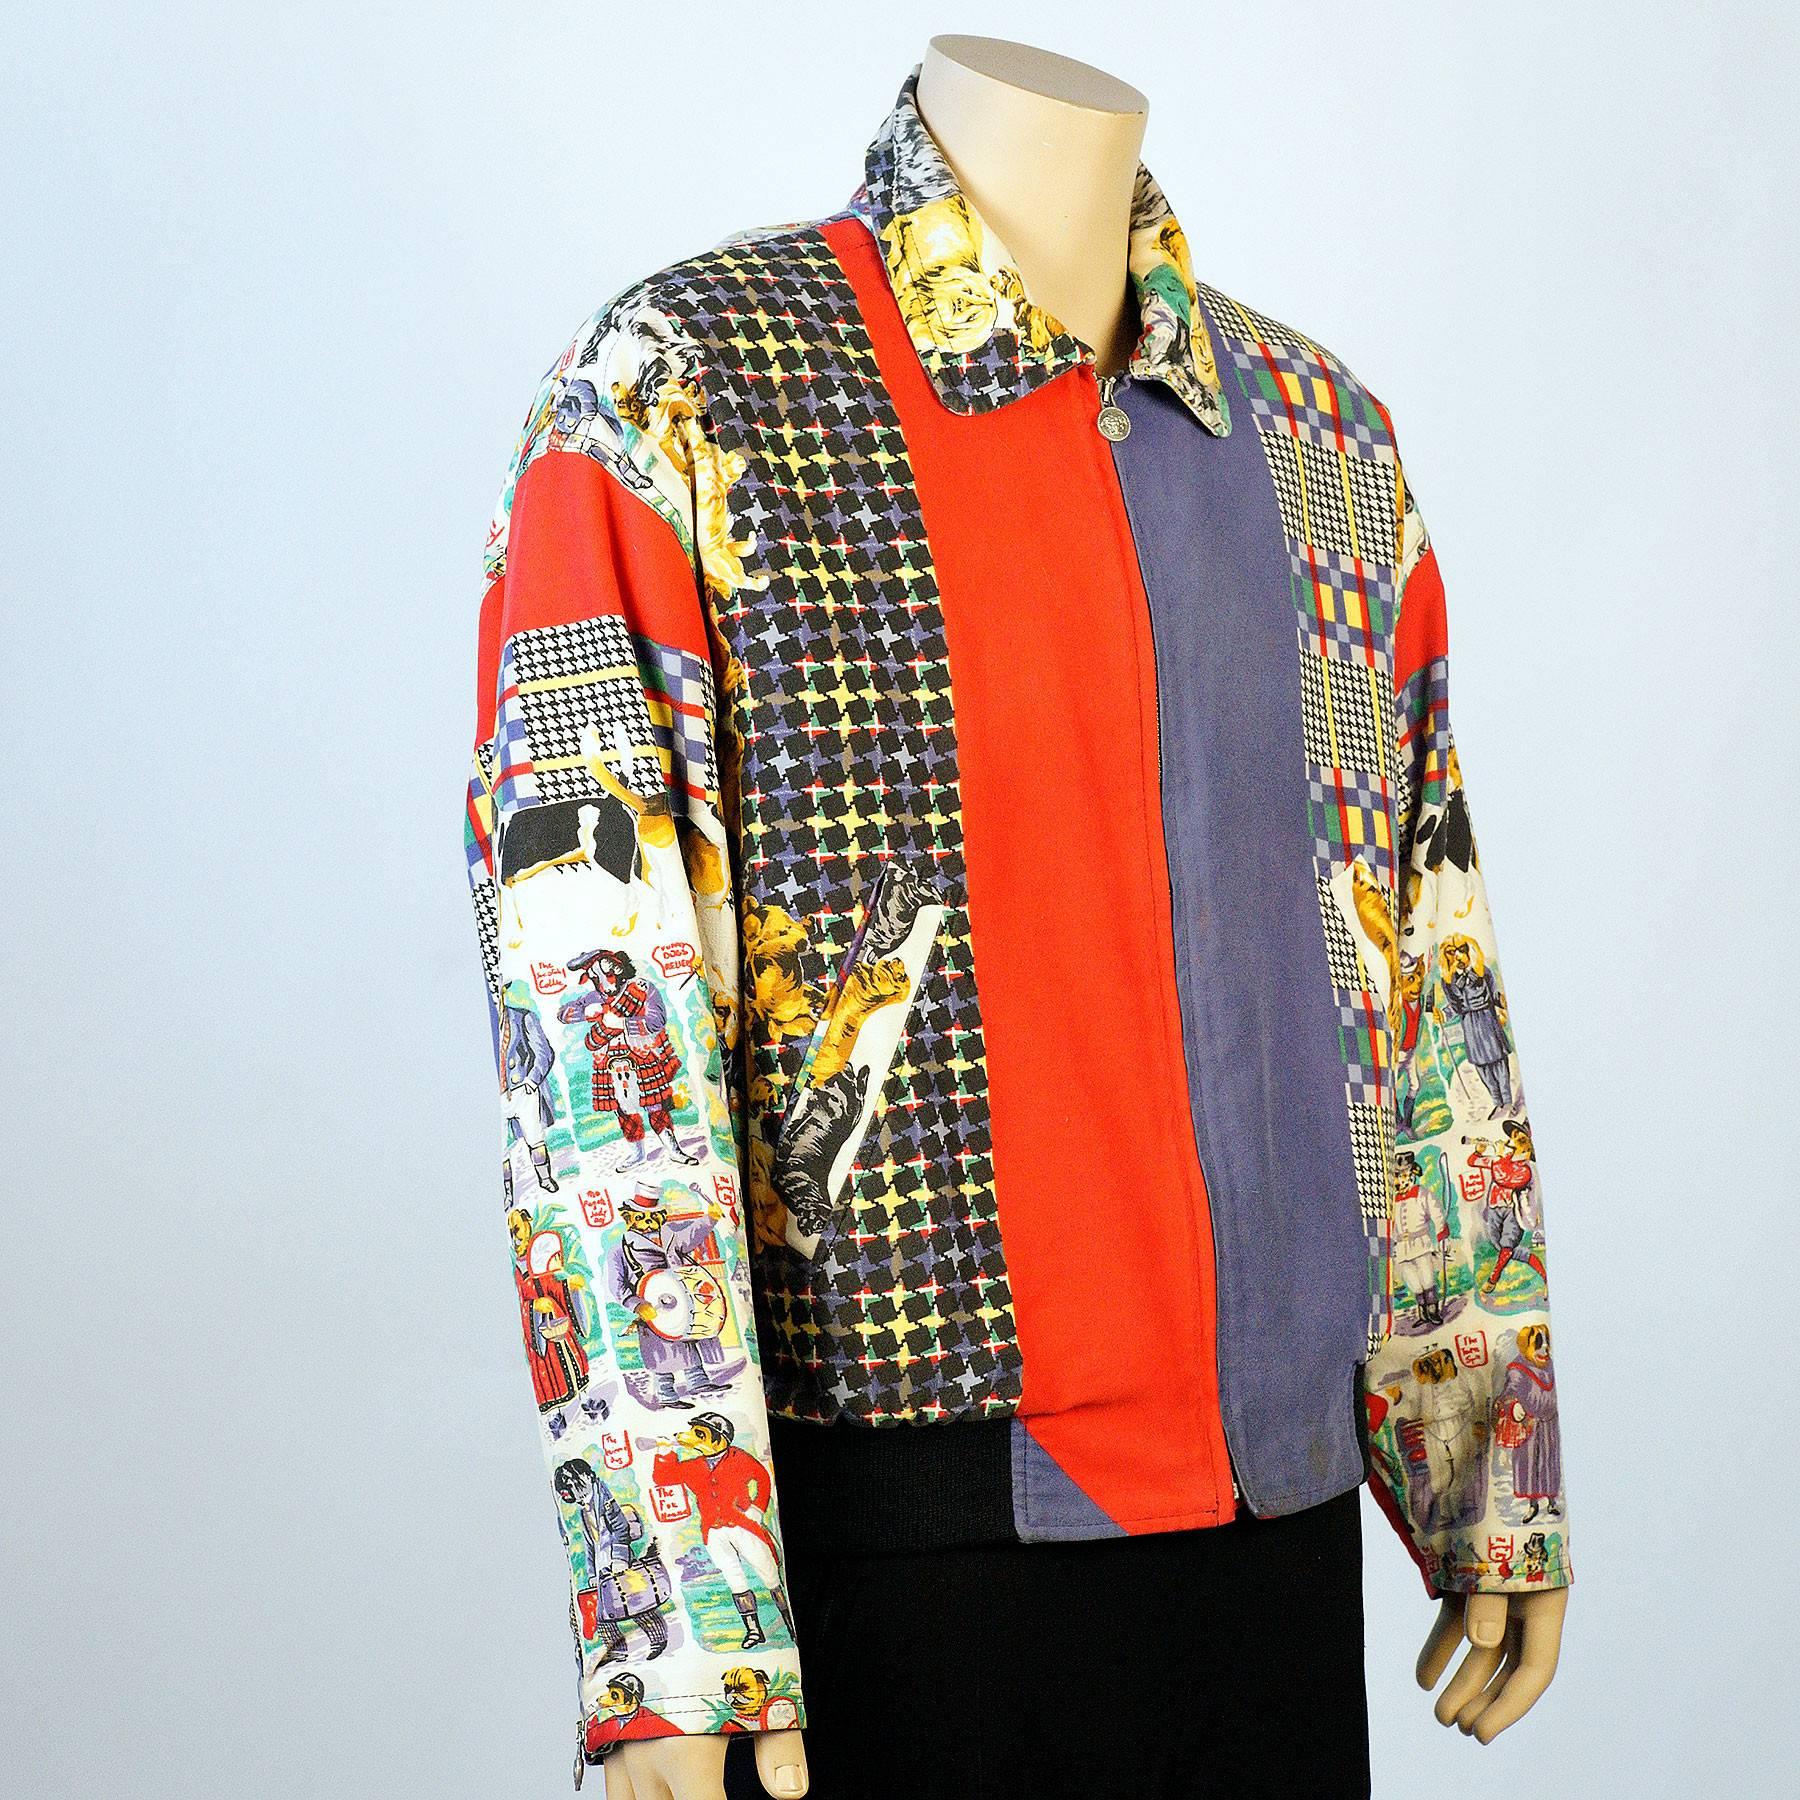 Rare Versus (Versace) multi color dog print jacket with drop shoulders and a silver medusa head logo zipper up.

Made In Italy.
Size: Tag marked Large 

-Measurements-
Sleeve length:22